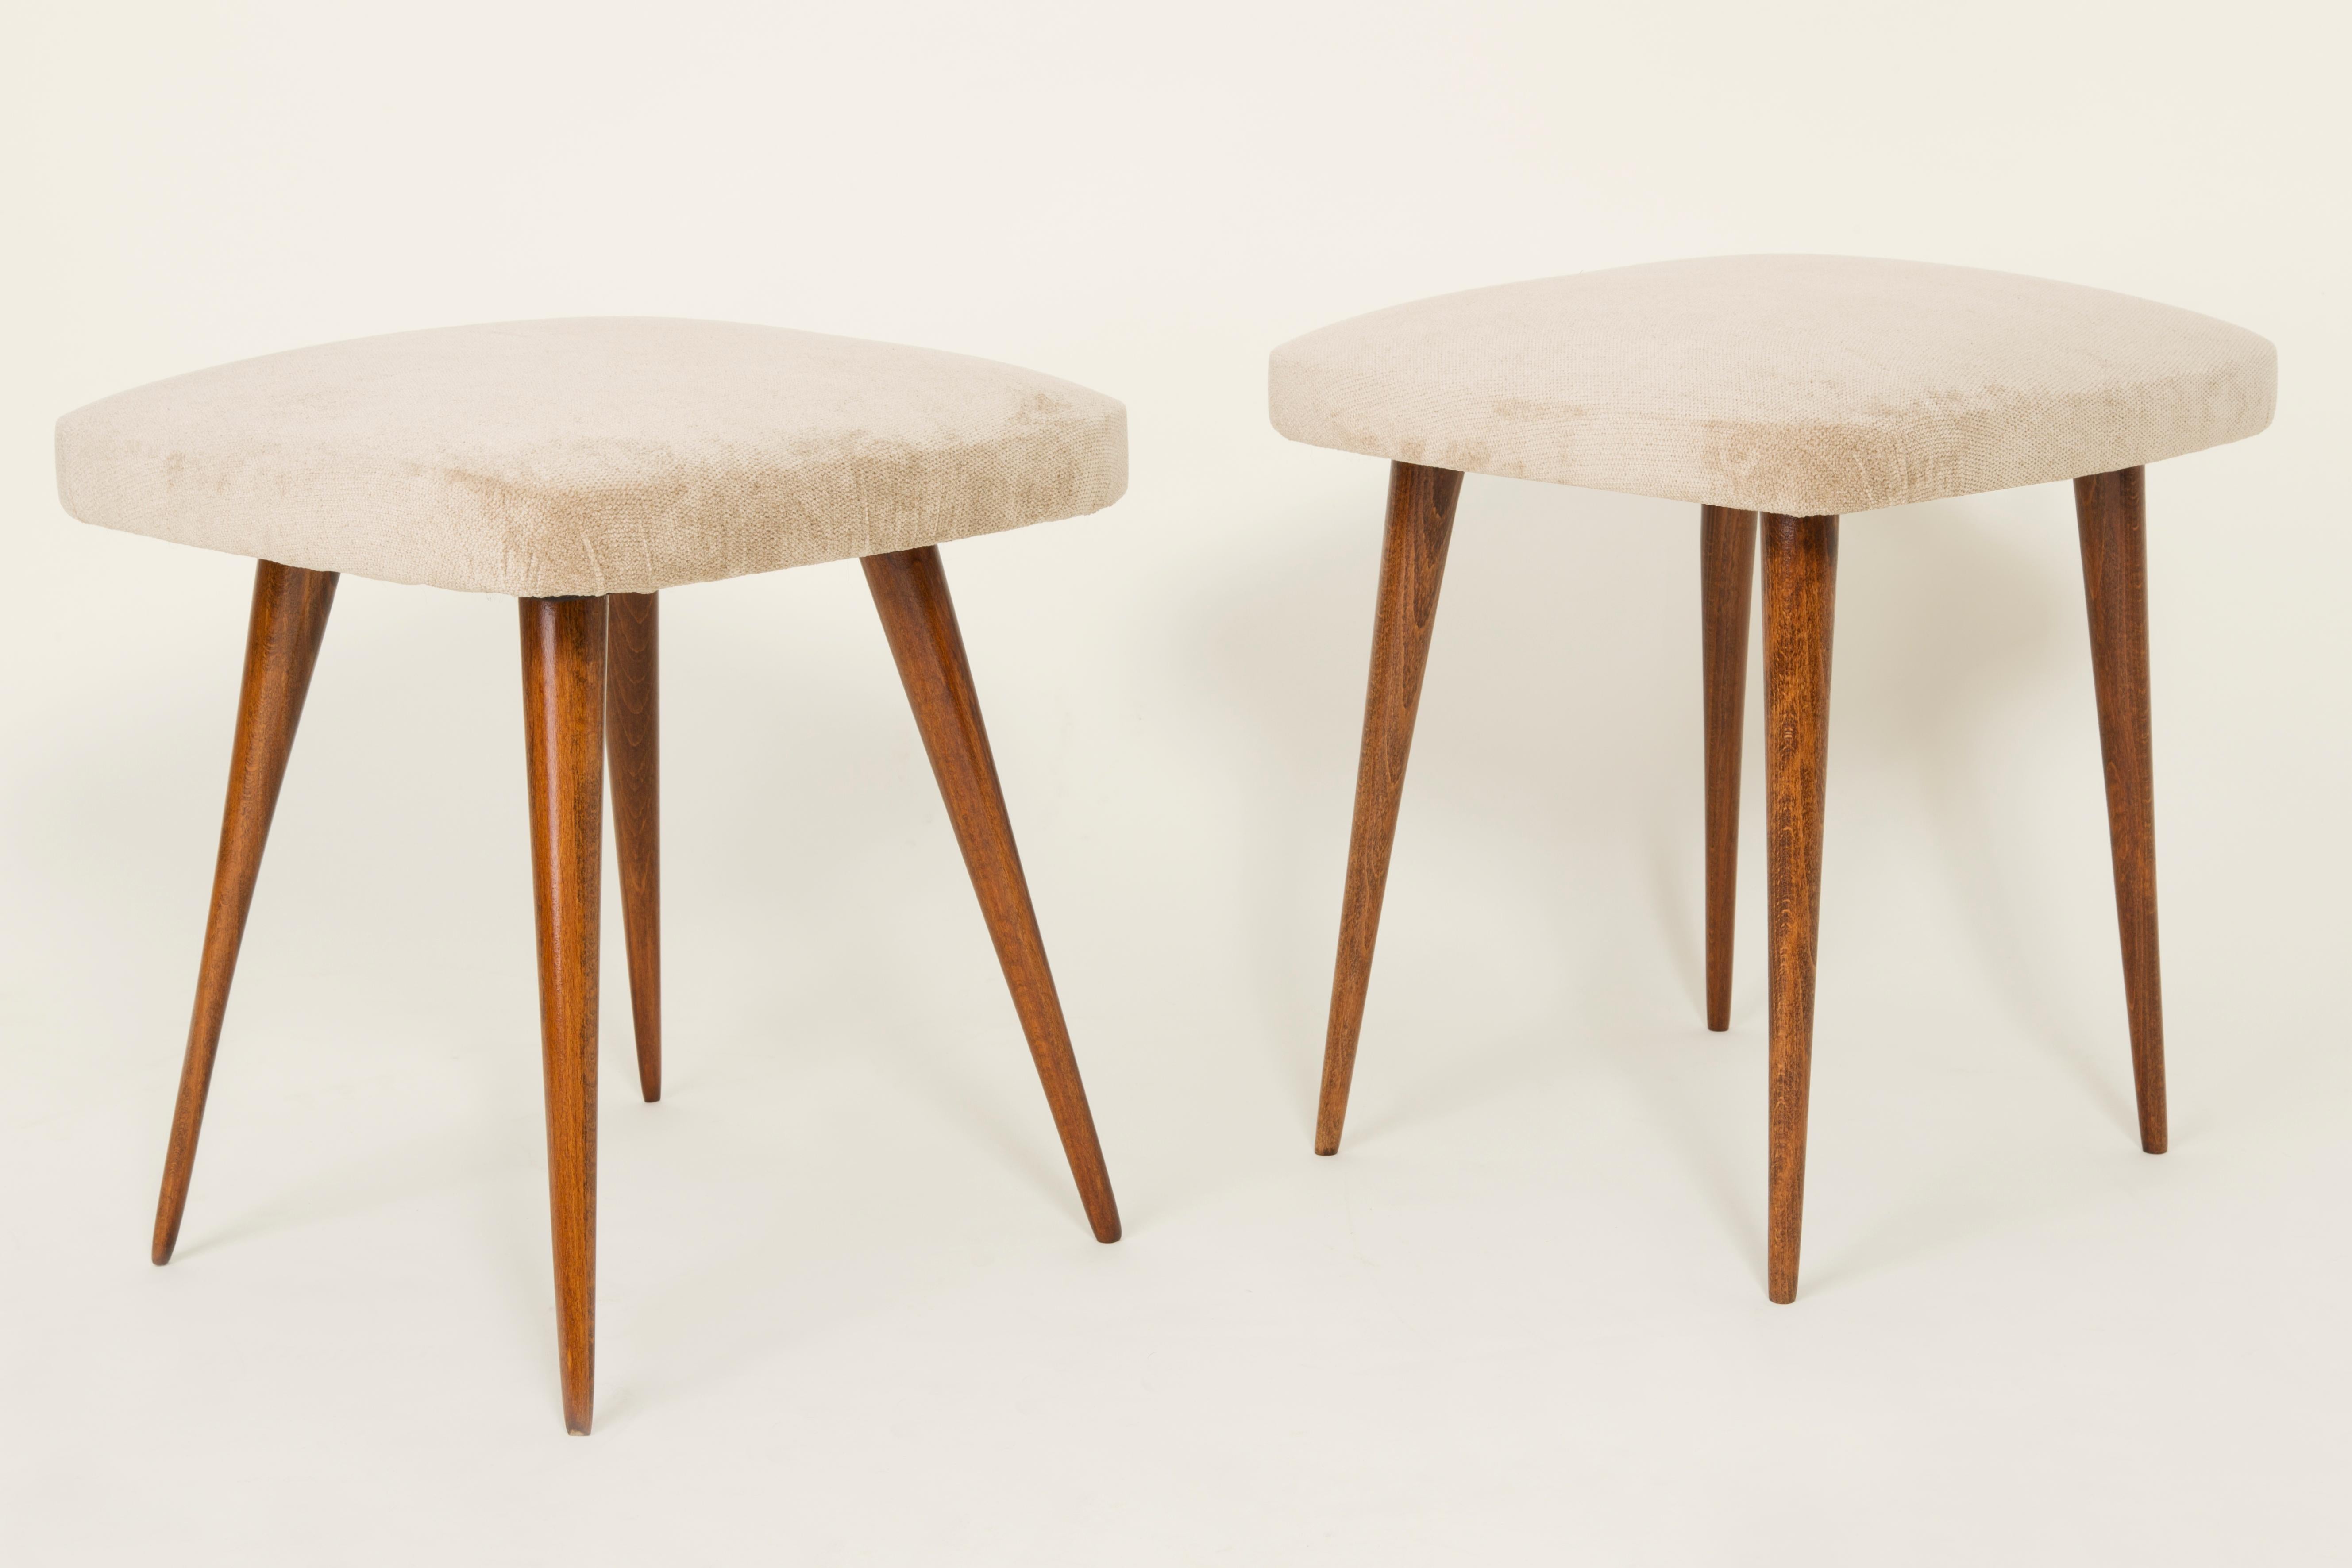 Hand-Crafted Pair of Beige Stools, 1960s